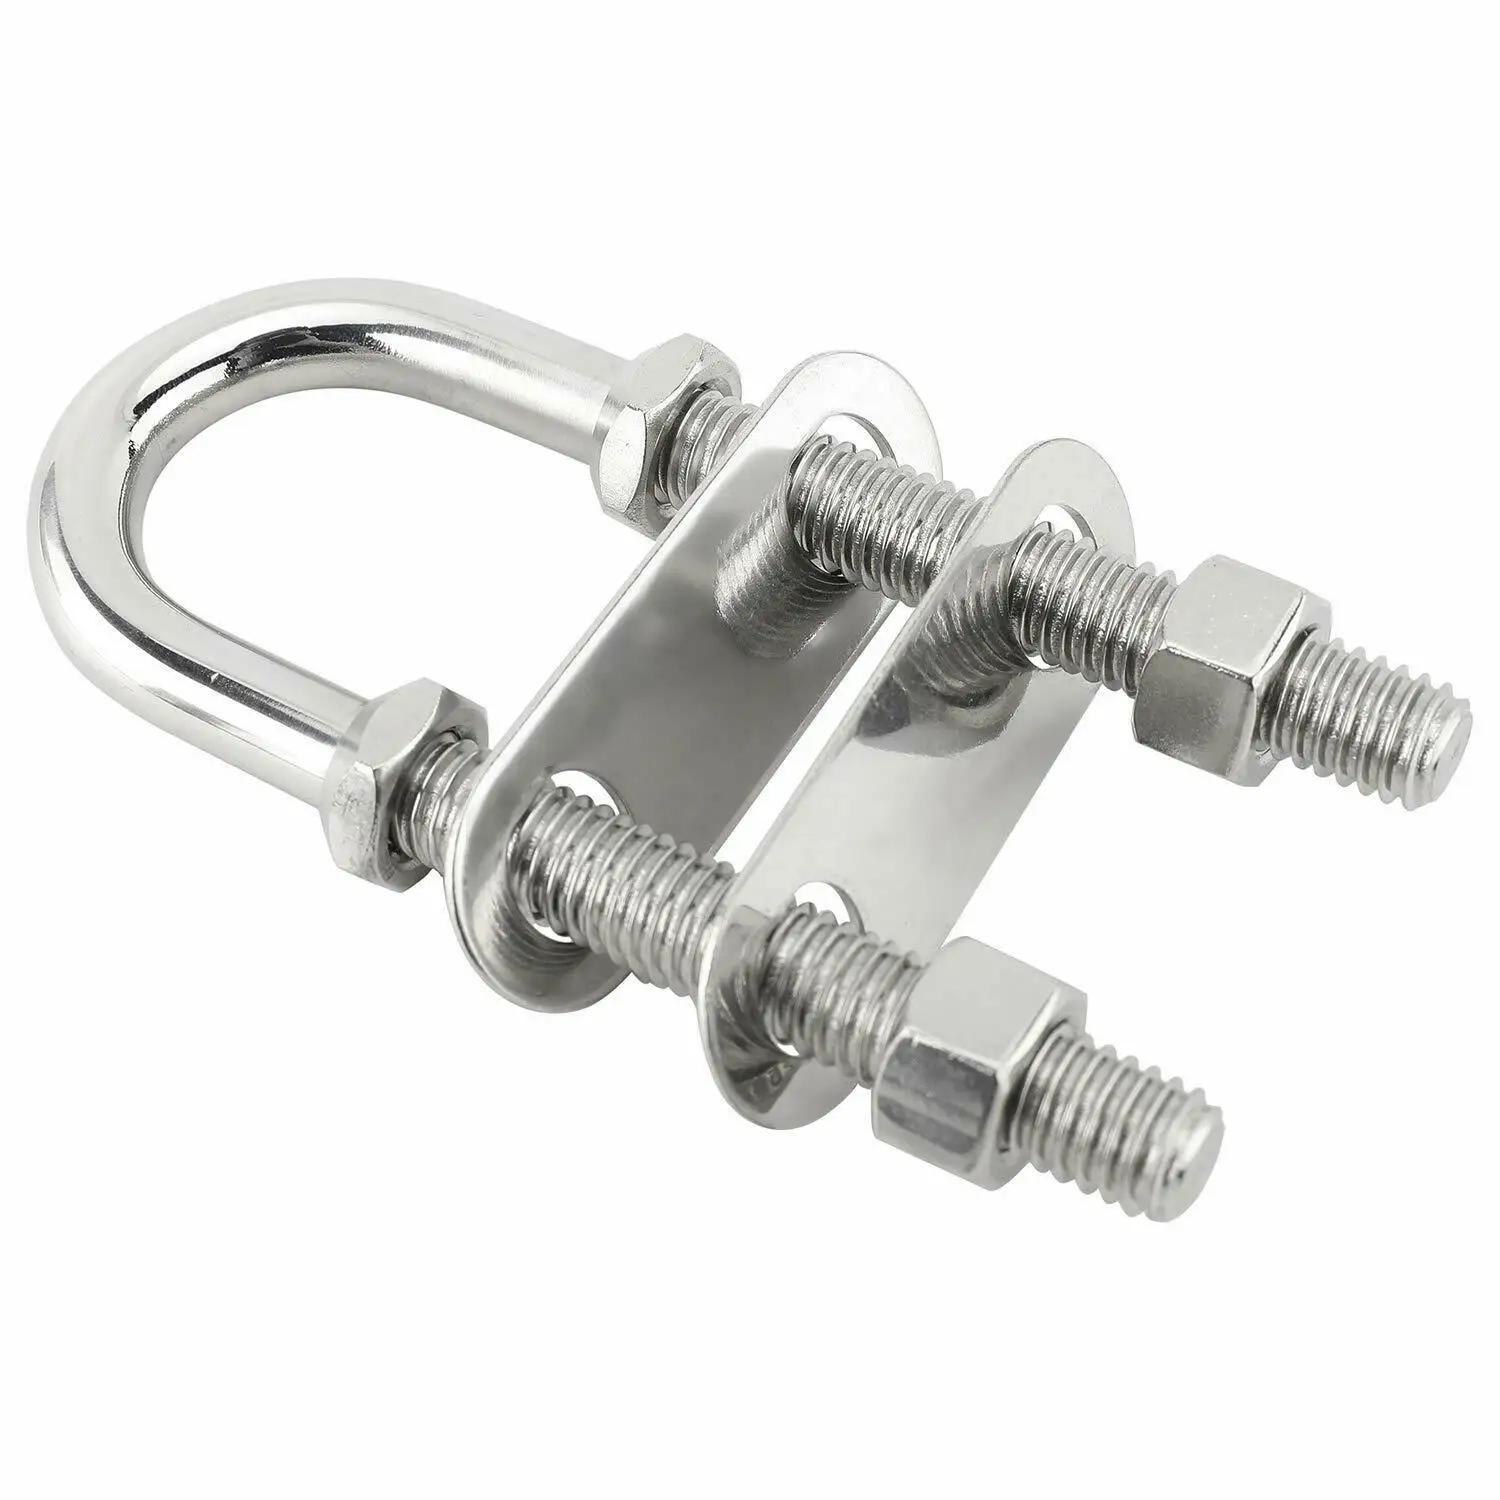 

Boat Marine 304 Stainless Steel 10MM Bow Stock Dia 3/8" Stern Eye Length 5 inch U-Bolt Cleat Ring Rigging Hardware